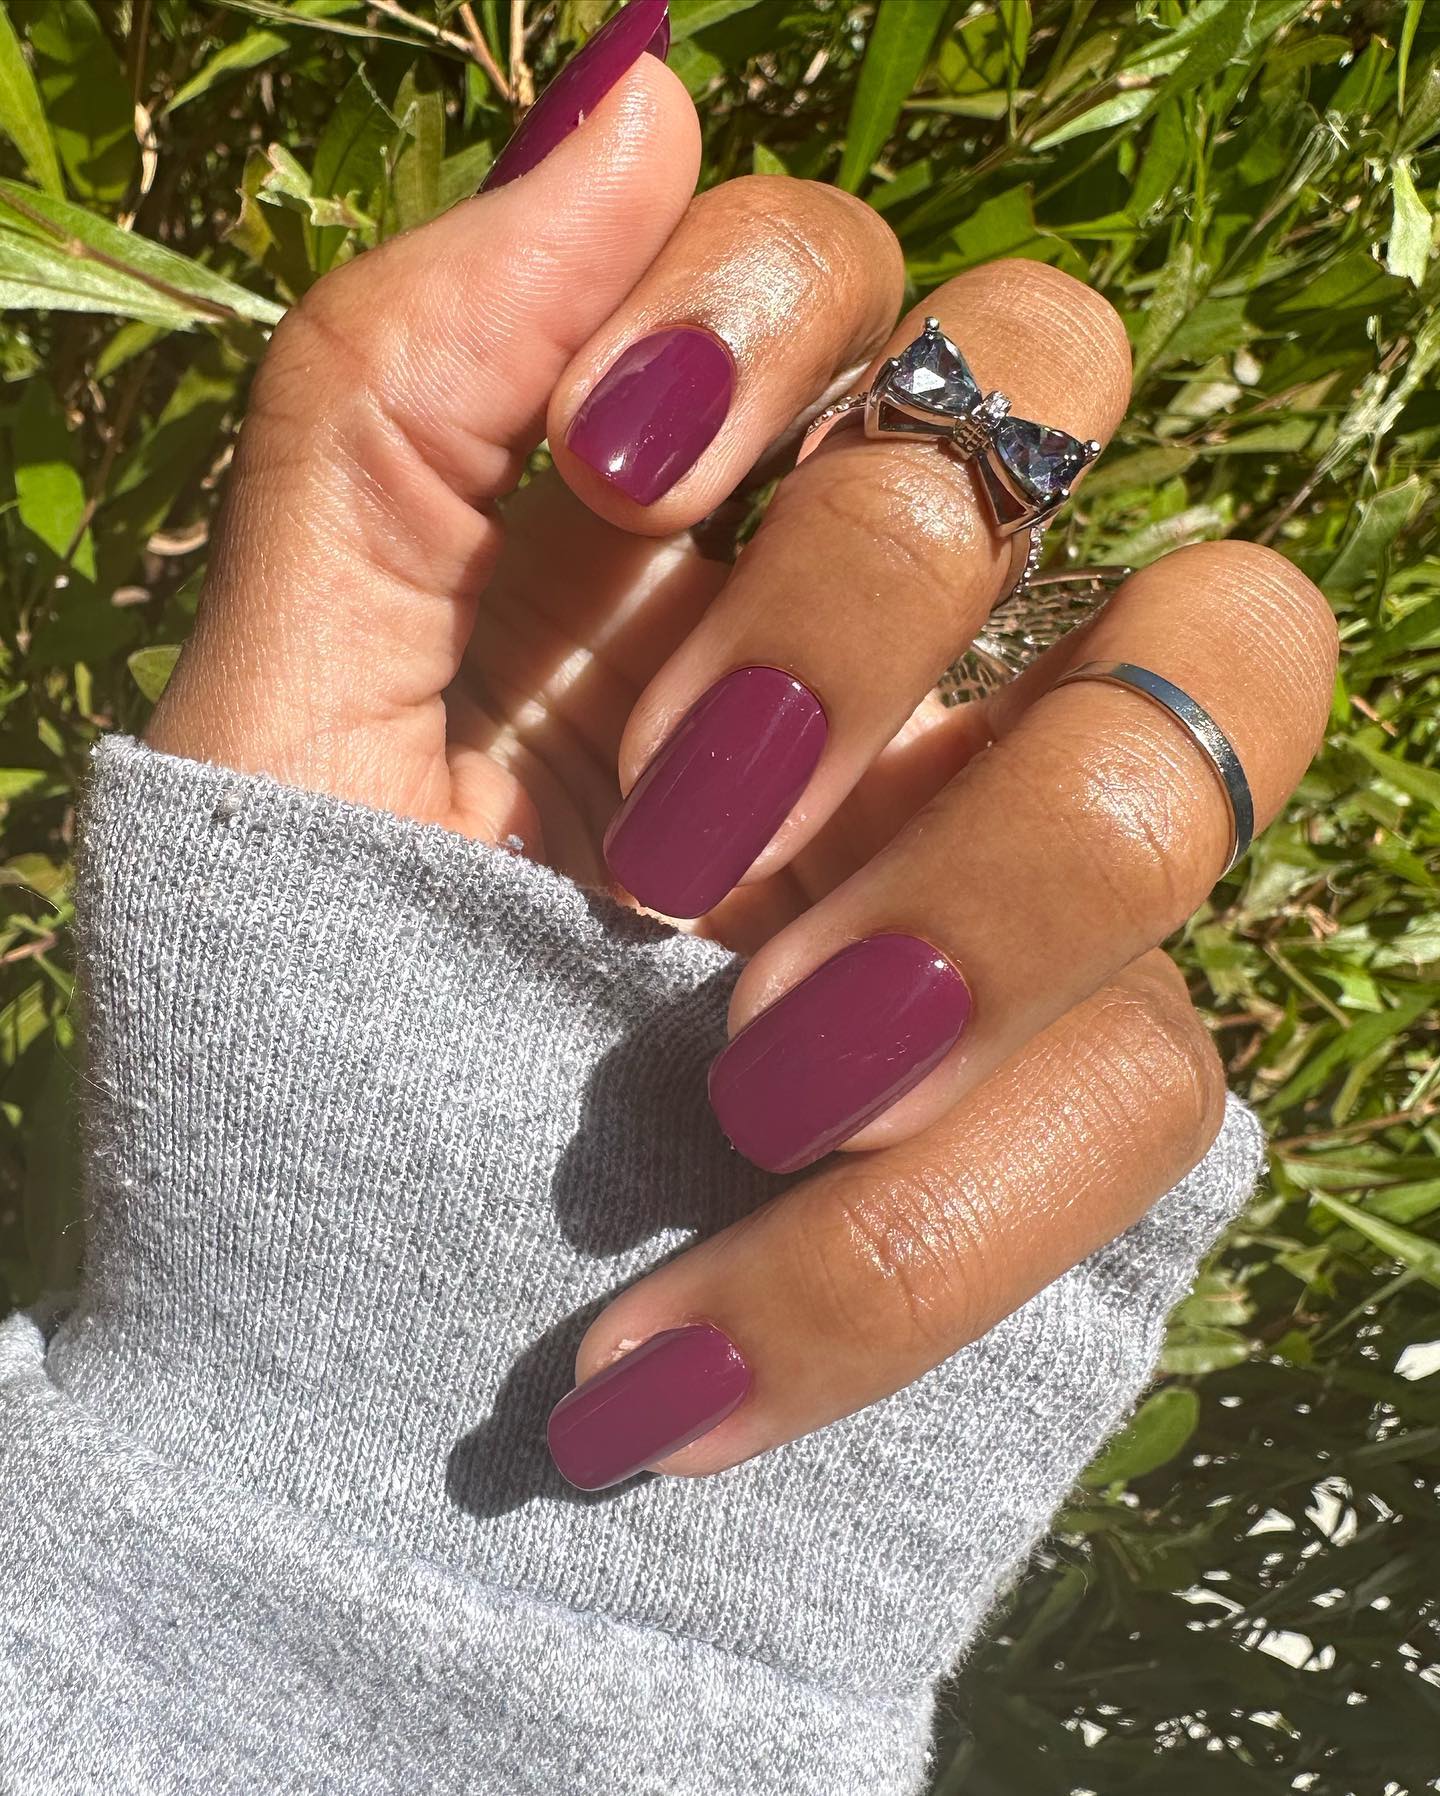 3 Chic Winter Designs From The Nail Artists At Bellacures